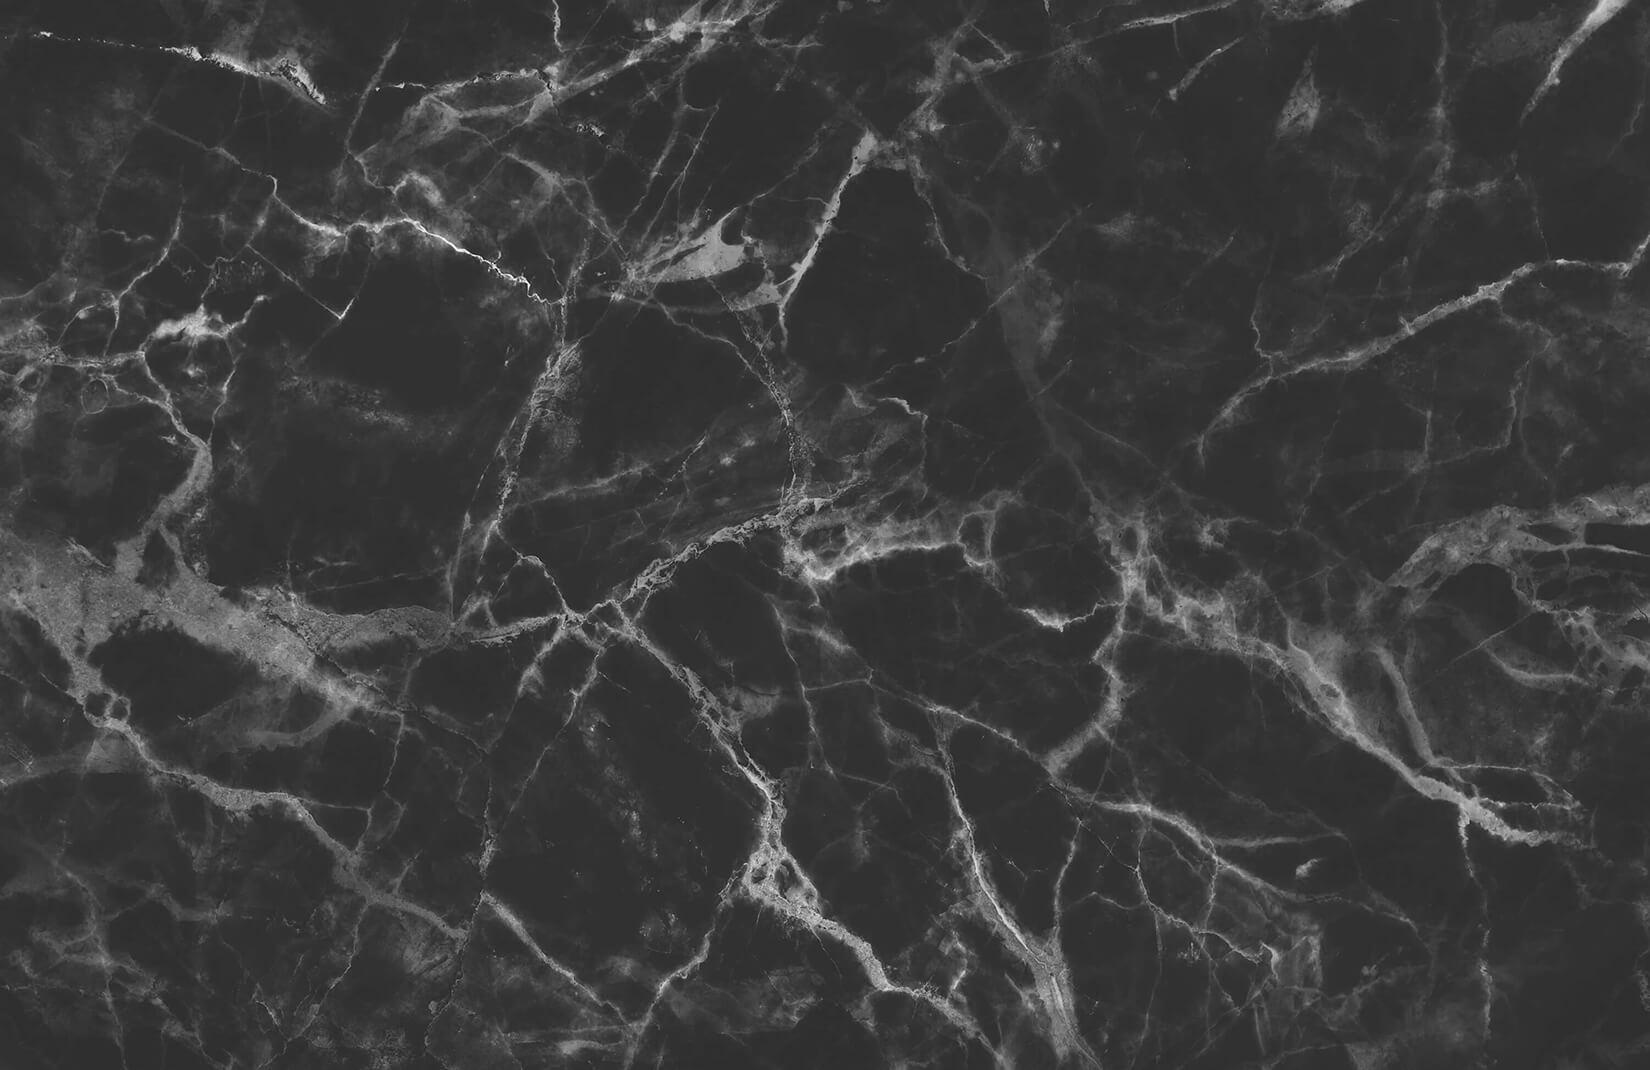 Black and White Marble Wallpaper Free Download 1650x1070